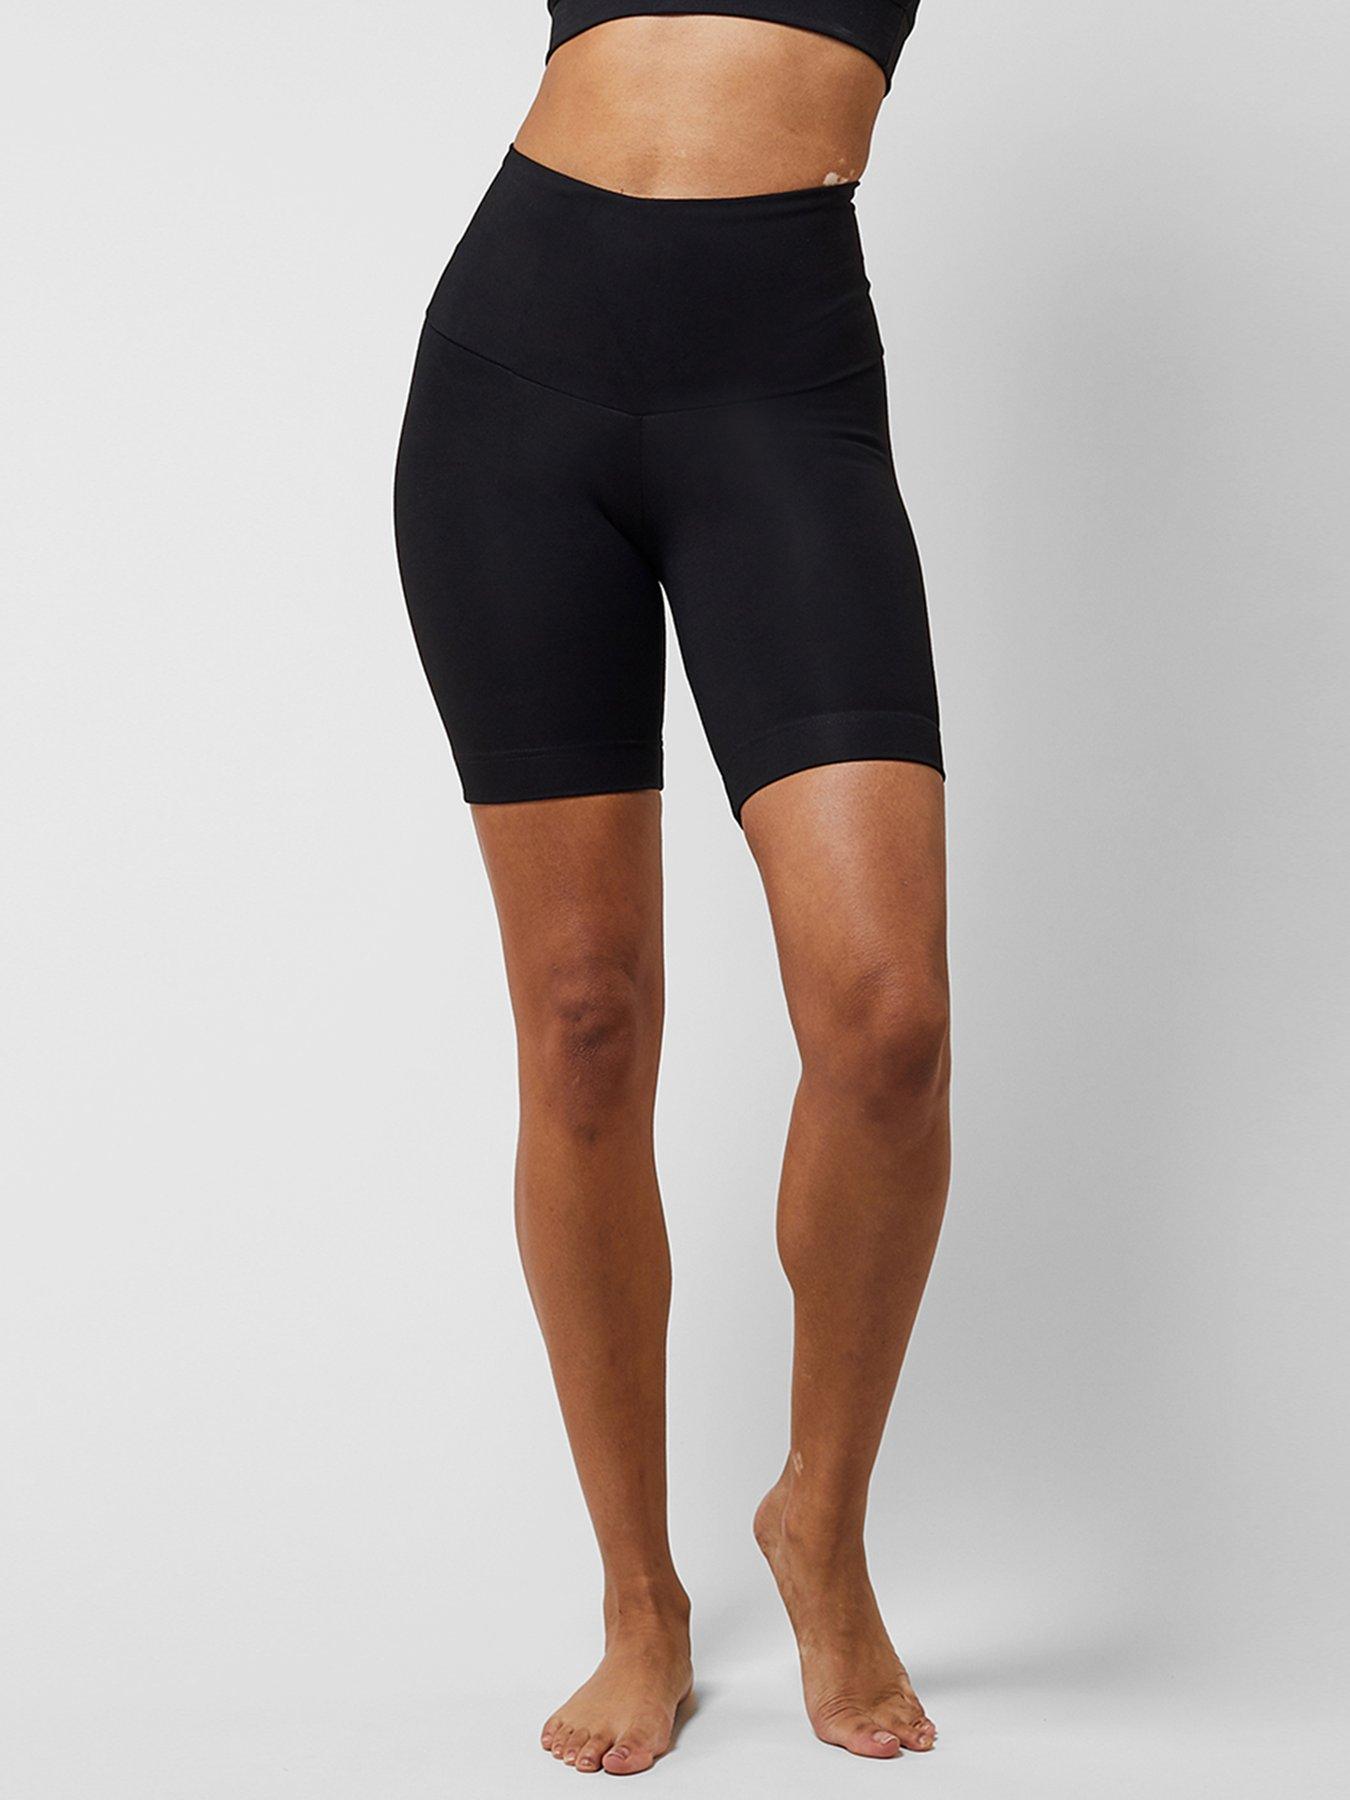 TLC Sport Performance Tummy Control Extra Strong Compression